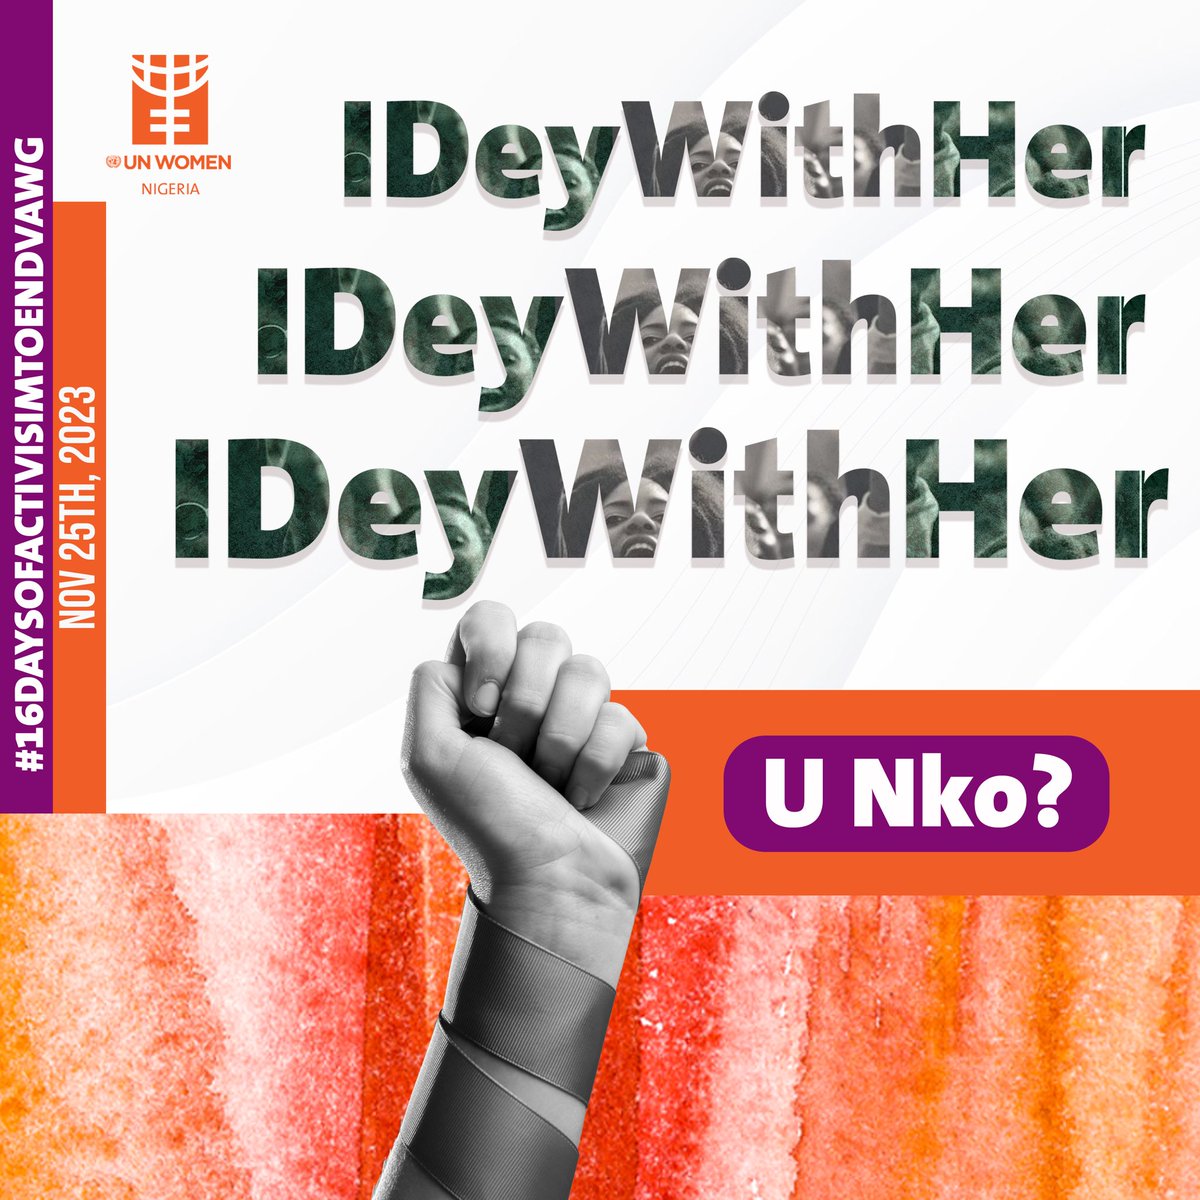 📢 COMING SOON: #16Days of Activism to end violence against women and girls begins on 25th November. This #16Days, we are here to remind you that there is #NoExcuse for gender-based violence. We Dey With Her✊ U Nko? — @BeatriceEyong @UN_Nigeria @FMWA_ng @unwomenafrica